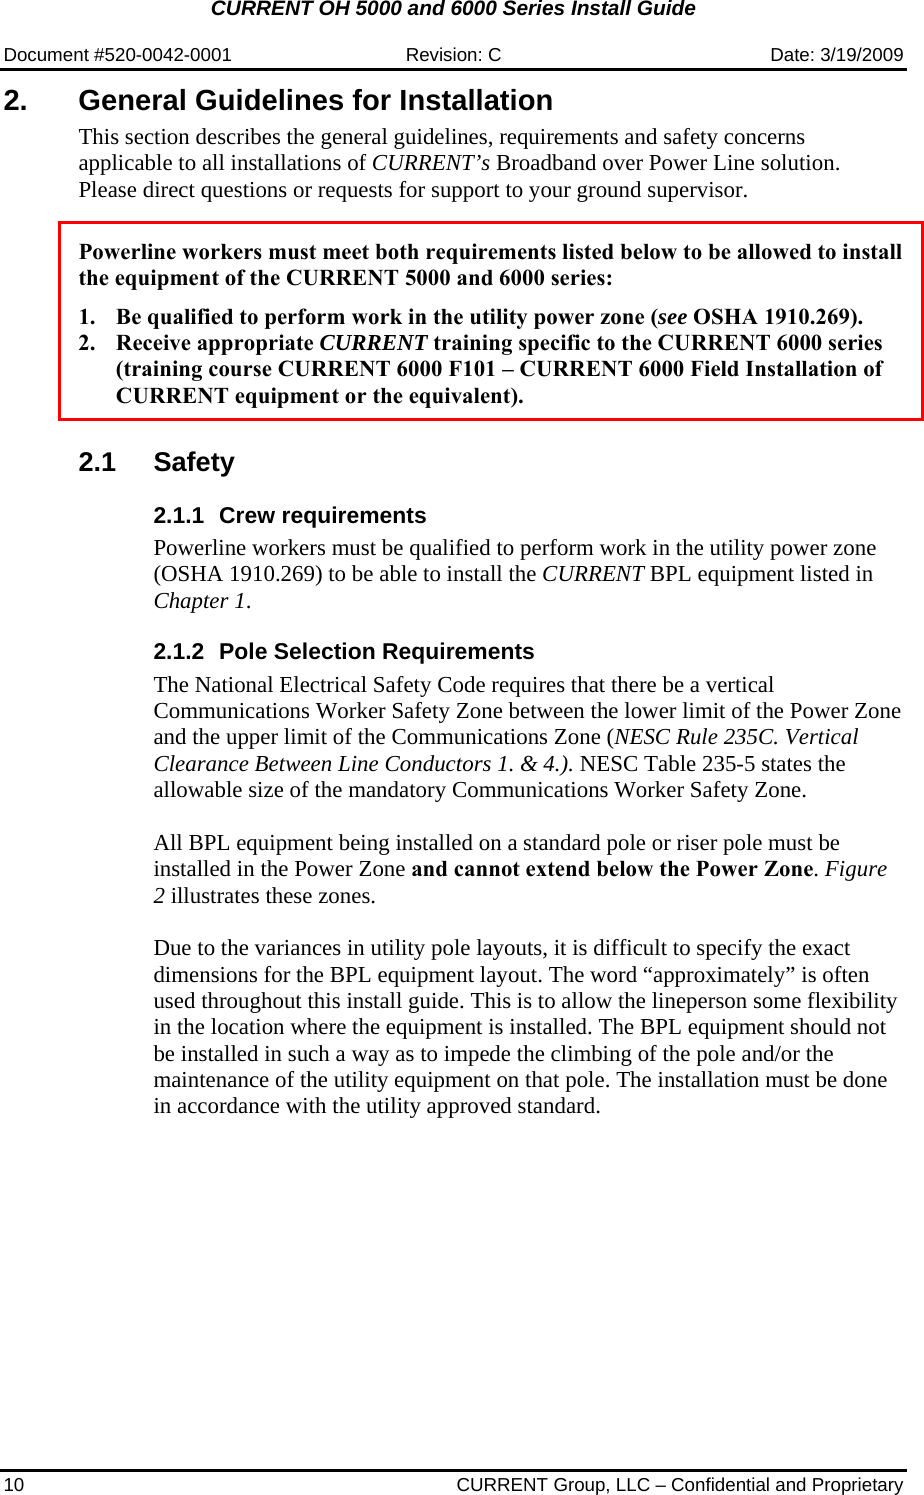 CURRENT OH 5000 and 6000 Series Install Guide  Document #520-0042-0001  Revision: C  Date: 3/19/2009 10  CURRENT Group, LLC – Confidential and Proprietary 2.  General Guidelines for Installation This section describes the general guidelines, requirements and safety concerns applicable to all installations of CURRENT’s Broadband over Power Line solution. Please direct questions or requests for support to your ground supervisor.   Powerline workers must meet both requirements listed below to be allowed to install the equipment of the CURRENT 5000 and 6000 series:  1. Be qualified to perform work in the utility power zone (see OSHA 1910.269). 2. Receive appropriate CURRENT training specific to the CURRENT 6000 series (training course CURRENT 6000 F101 – CURRENT 6000 Field Installation of CURRENT equipment or the equivalent).   2.1 Safety 2.1.1 Crew requirements Powerline workers must be qualified to perform work in the utility power zone (OSHA 1910.269) to be able to install the CURRENT BPL equipment listed in Chapter 1. 2.1.2  Pole Selection Requirements The National Electrical Safety Code requires that there be a vertical Communications Worker Safety Zone between the lower limit of the Power Zone and the upper limit of the Communications Zone (NESC Rule 235C. Vertical Clearance Between Line Conductors 1. &amp; 4.). NESC Table 235-5 states the allowable size of the mandatory Communications Worker Safety Zone.  All BPL equipment being installed on a standard pole or riser pole must be installed in the Power Zone and cannot extend below the Power Zone. Figure 2 illustrates these zones.  Due to the variances in utility pole layouts, it is difficult to specify the exact dimensions for the BPL equipment layout. The word “approximately” is often used throughout this install guide. This is to allow the lineperson some flexibility in the location where the equipment is installed. The BPL equipment should not be installed in such a way as to impede the climbing of the pole and/or the maintenance of the utility equipment on that pole. The installation must be done in accordance with the utility approved standard. 